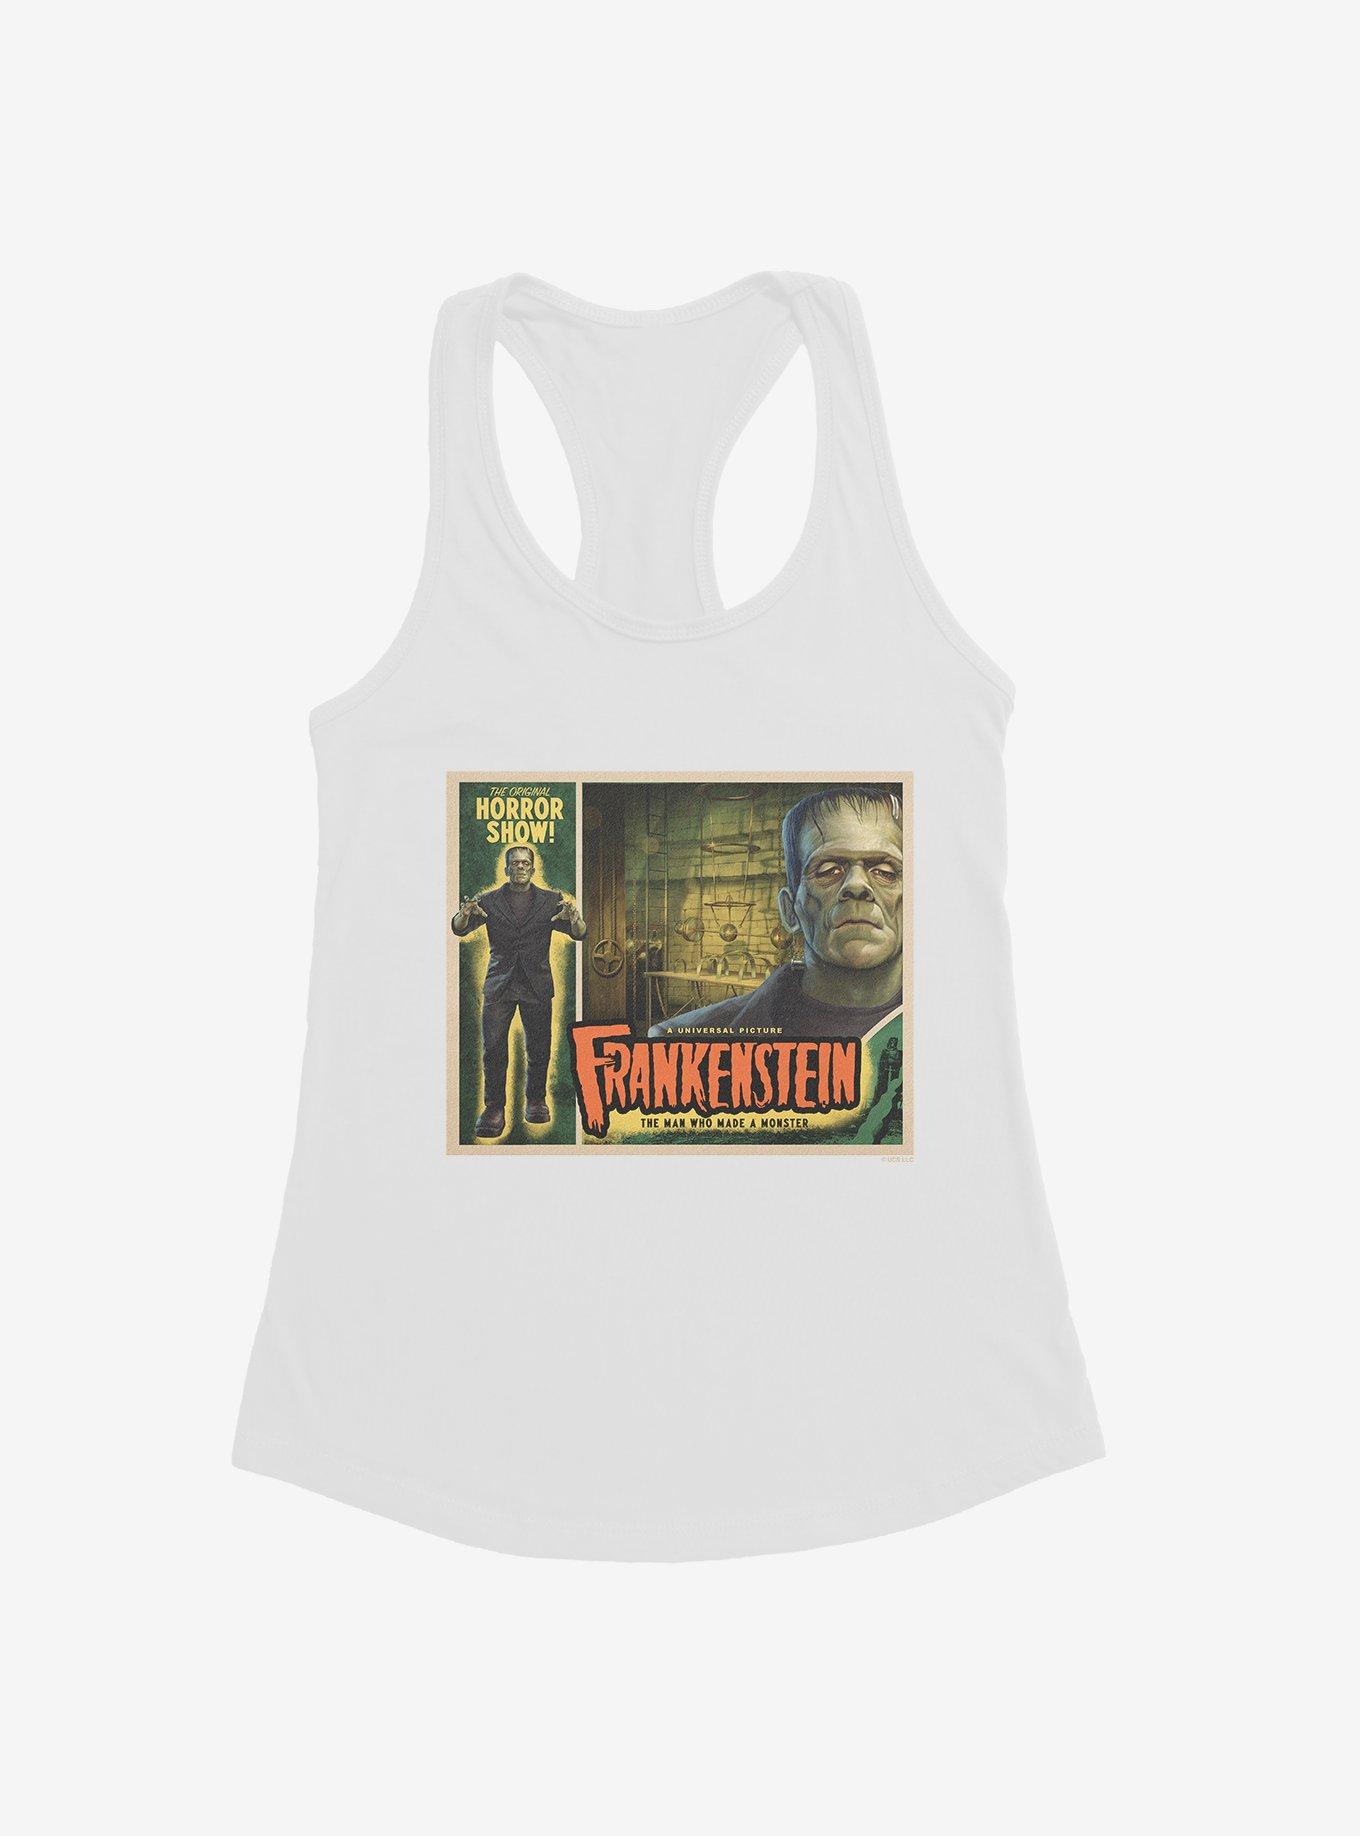 Frankenstein The Man Who Made A Monster Girls Tank